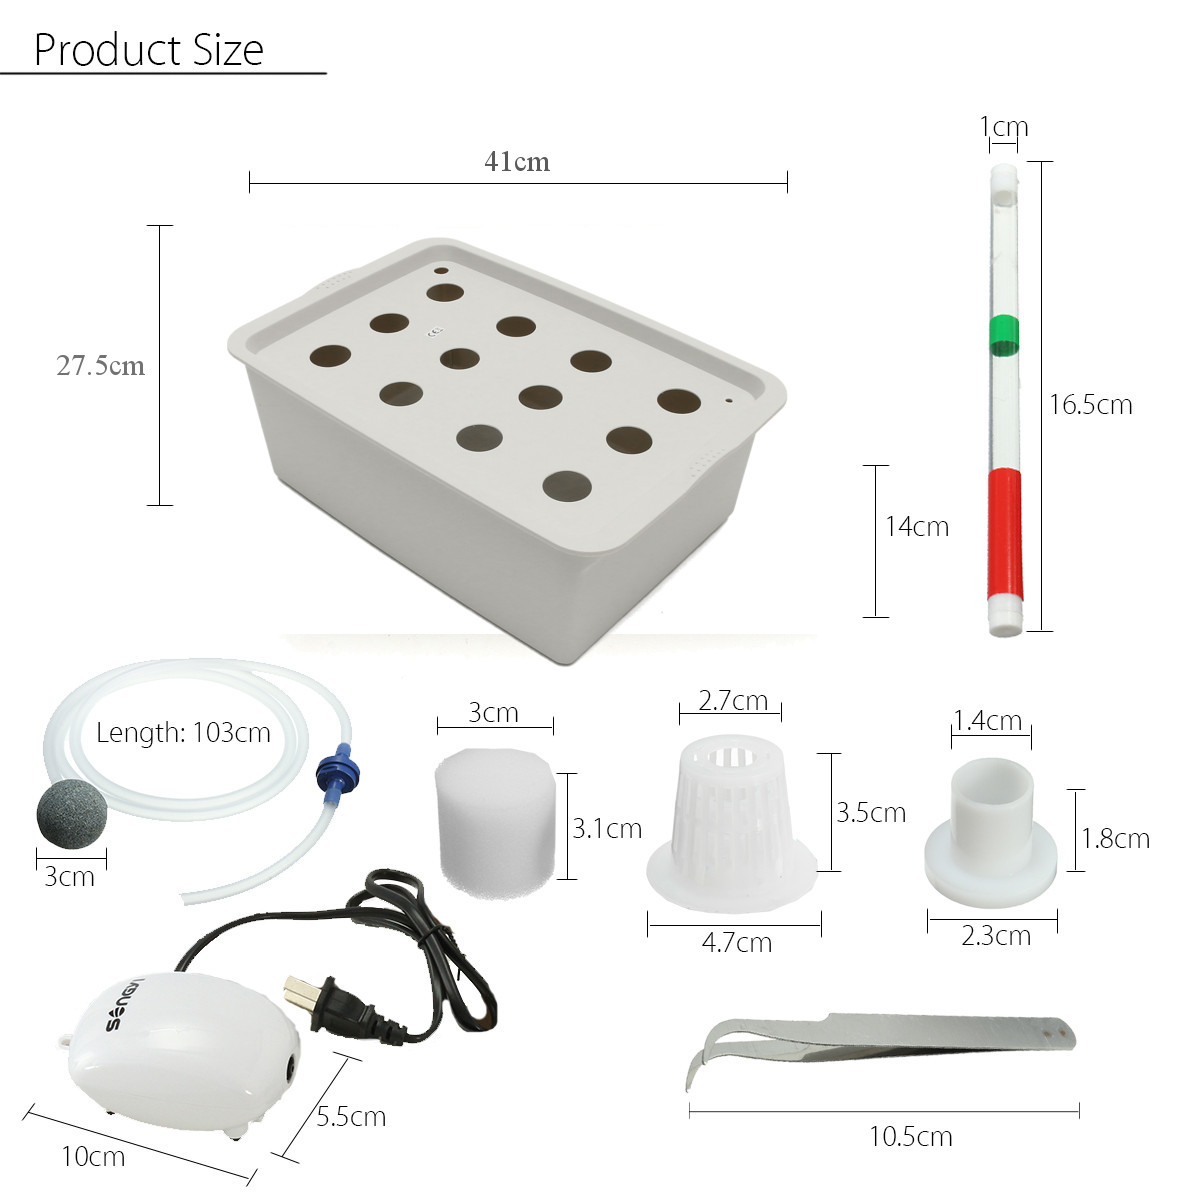 220V Hydroponic System Kit 12 Holes DWC Soilless Cultivation Indoor Water Planting Grow Box 21